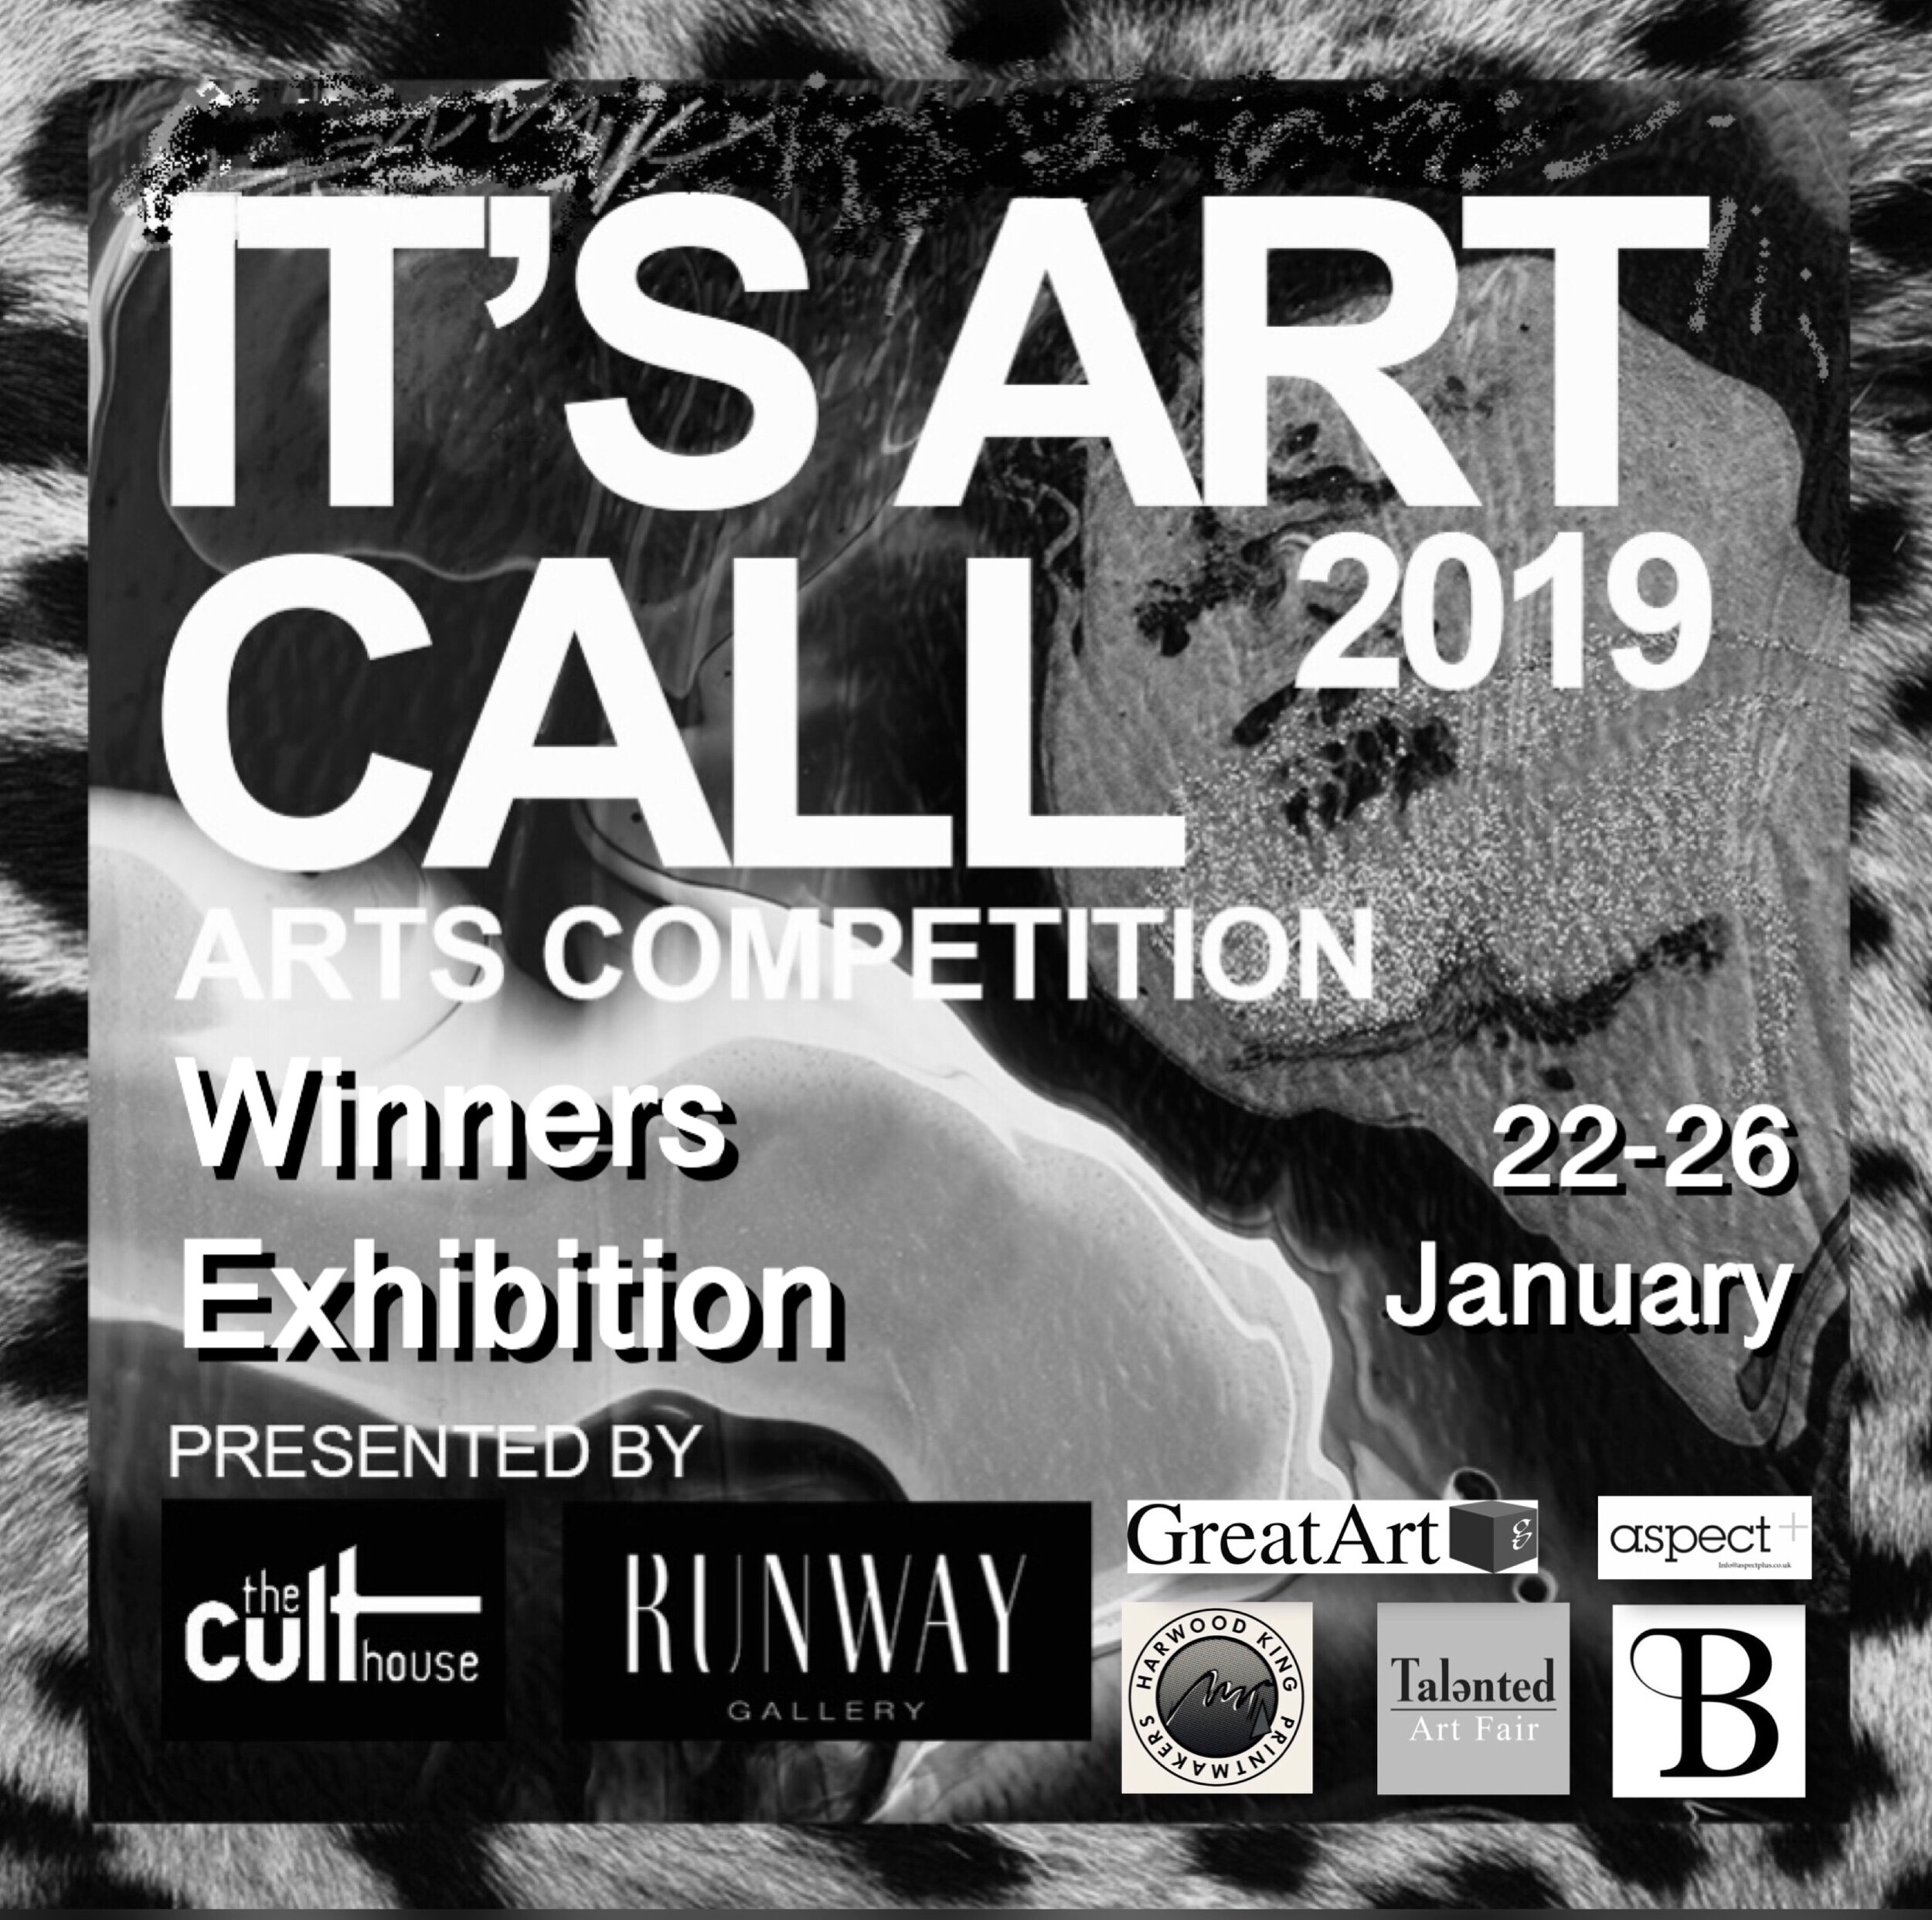 The Cult House It's Art Call 2019 Winners Exhibition Instagram.JPG